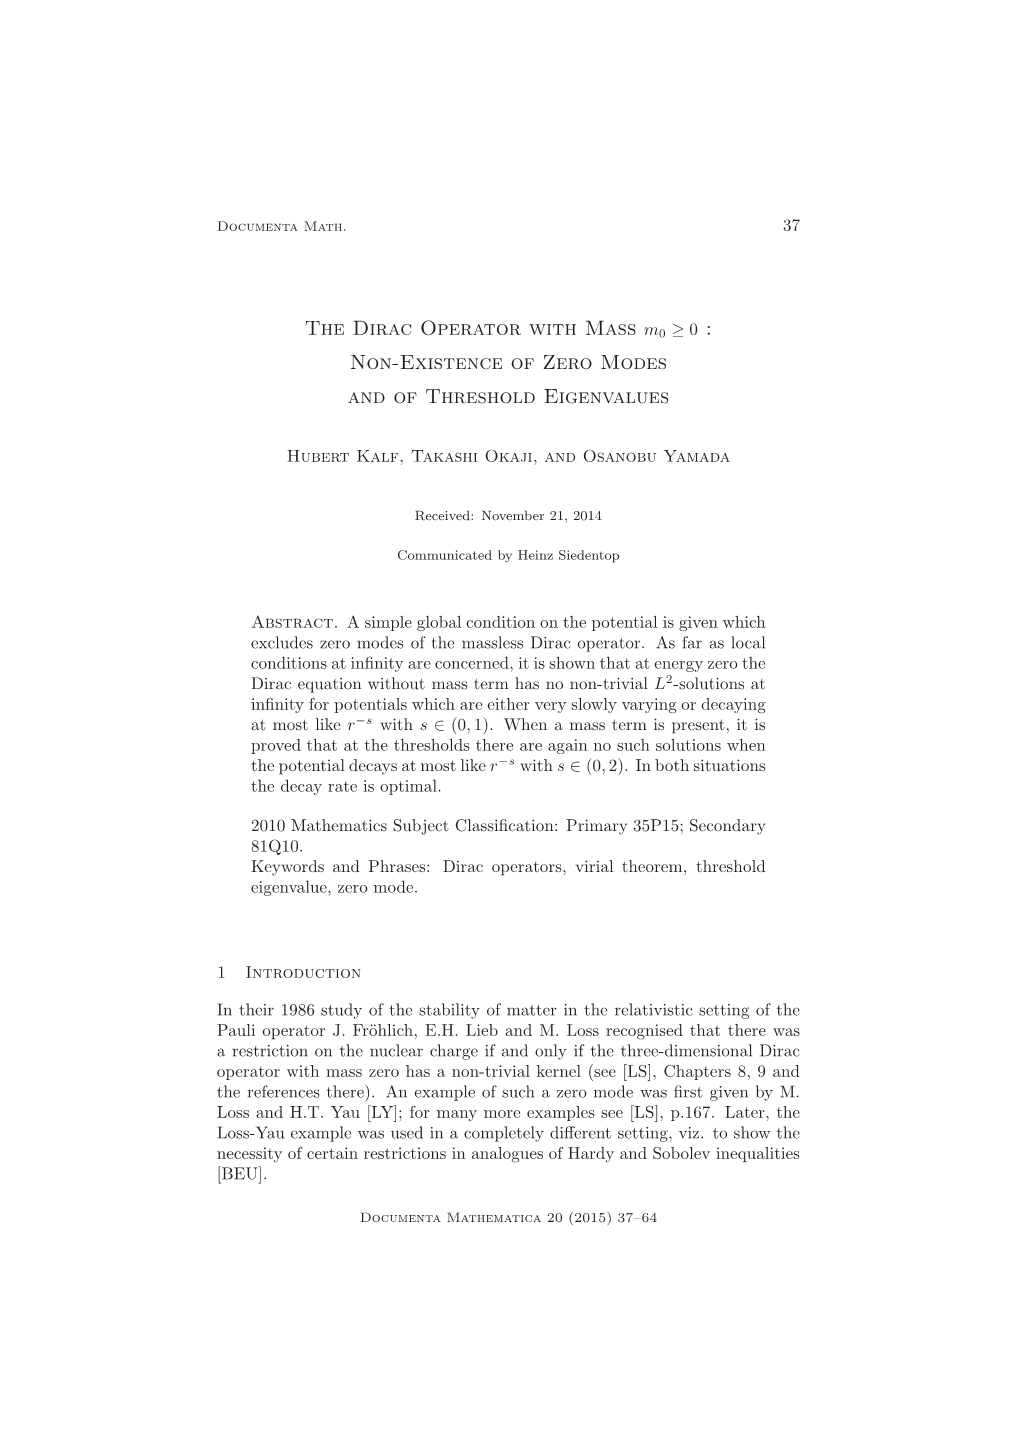 The Dirac Operator with Mass M0 ≥ 0 : Non-Existence of Zero Modes And